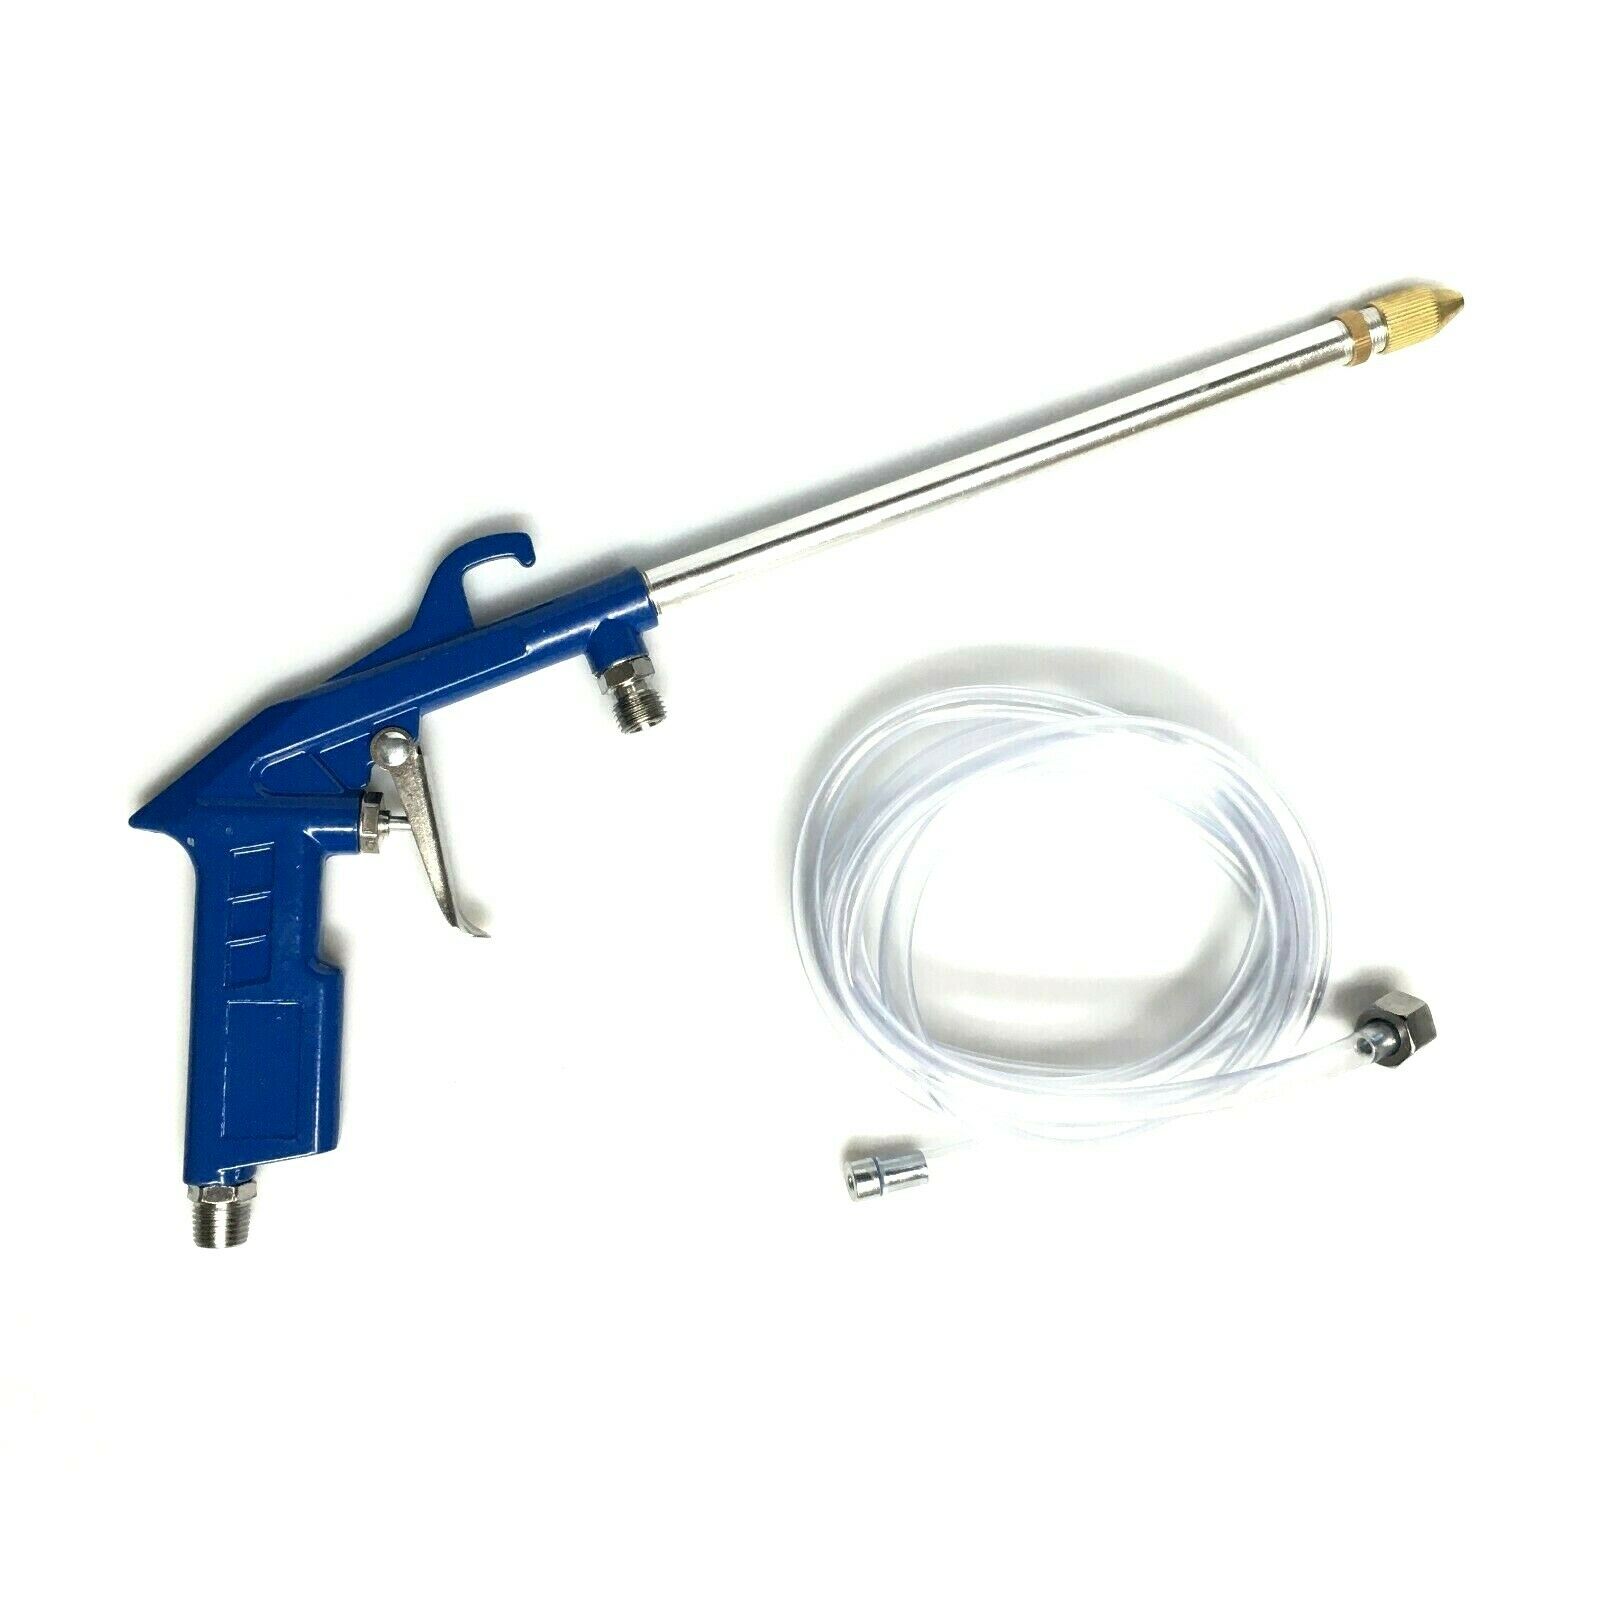 Power Engine Cleaner Air Gun Siphon Cleaning Oil Degreaser Solvent Soap 6' Hose